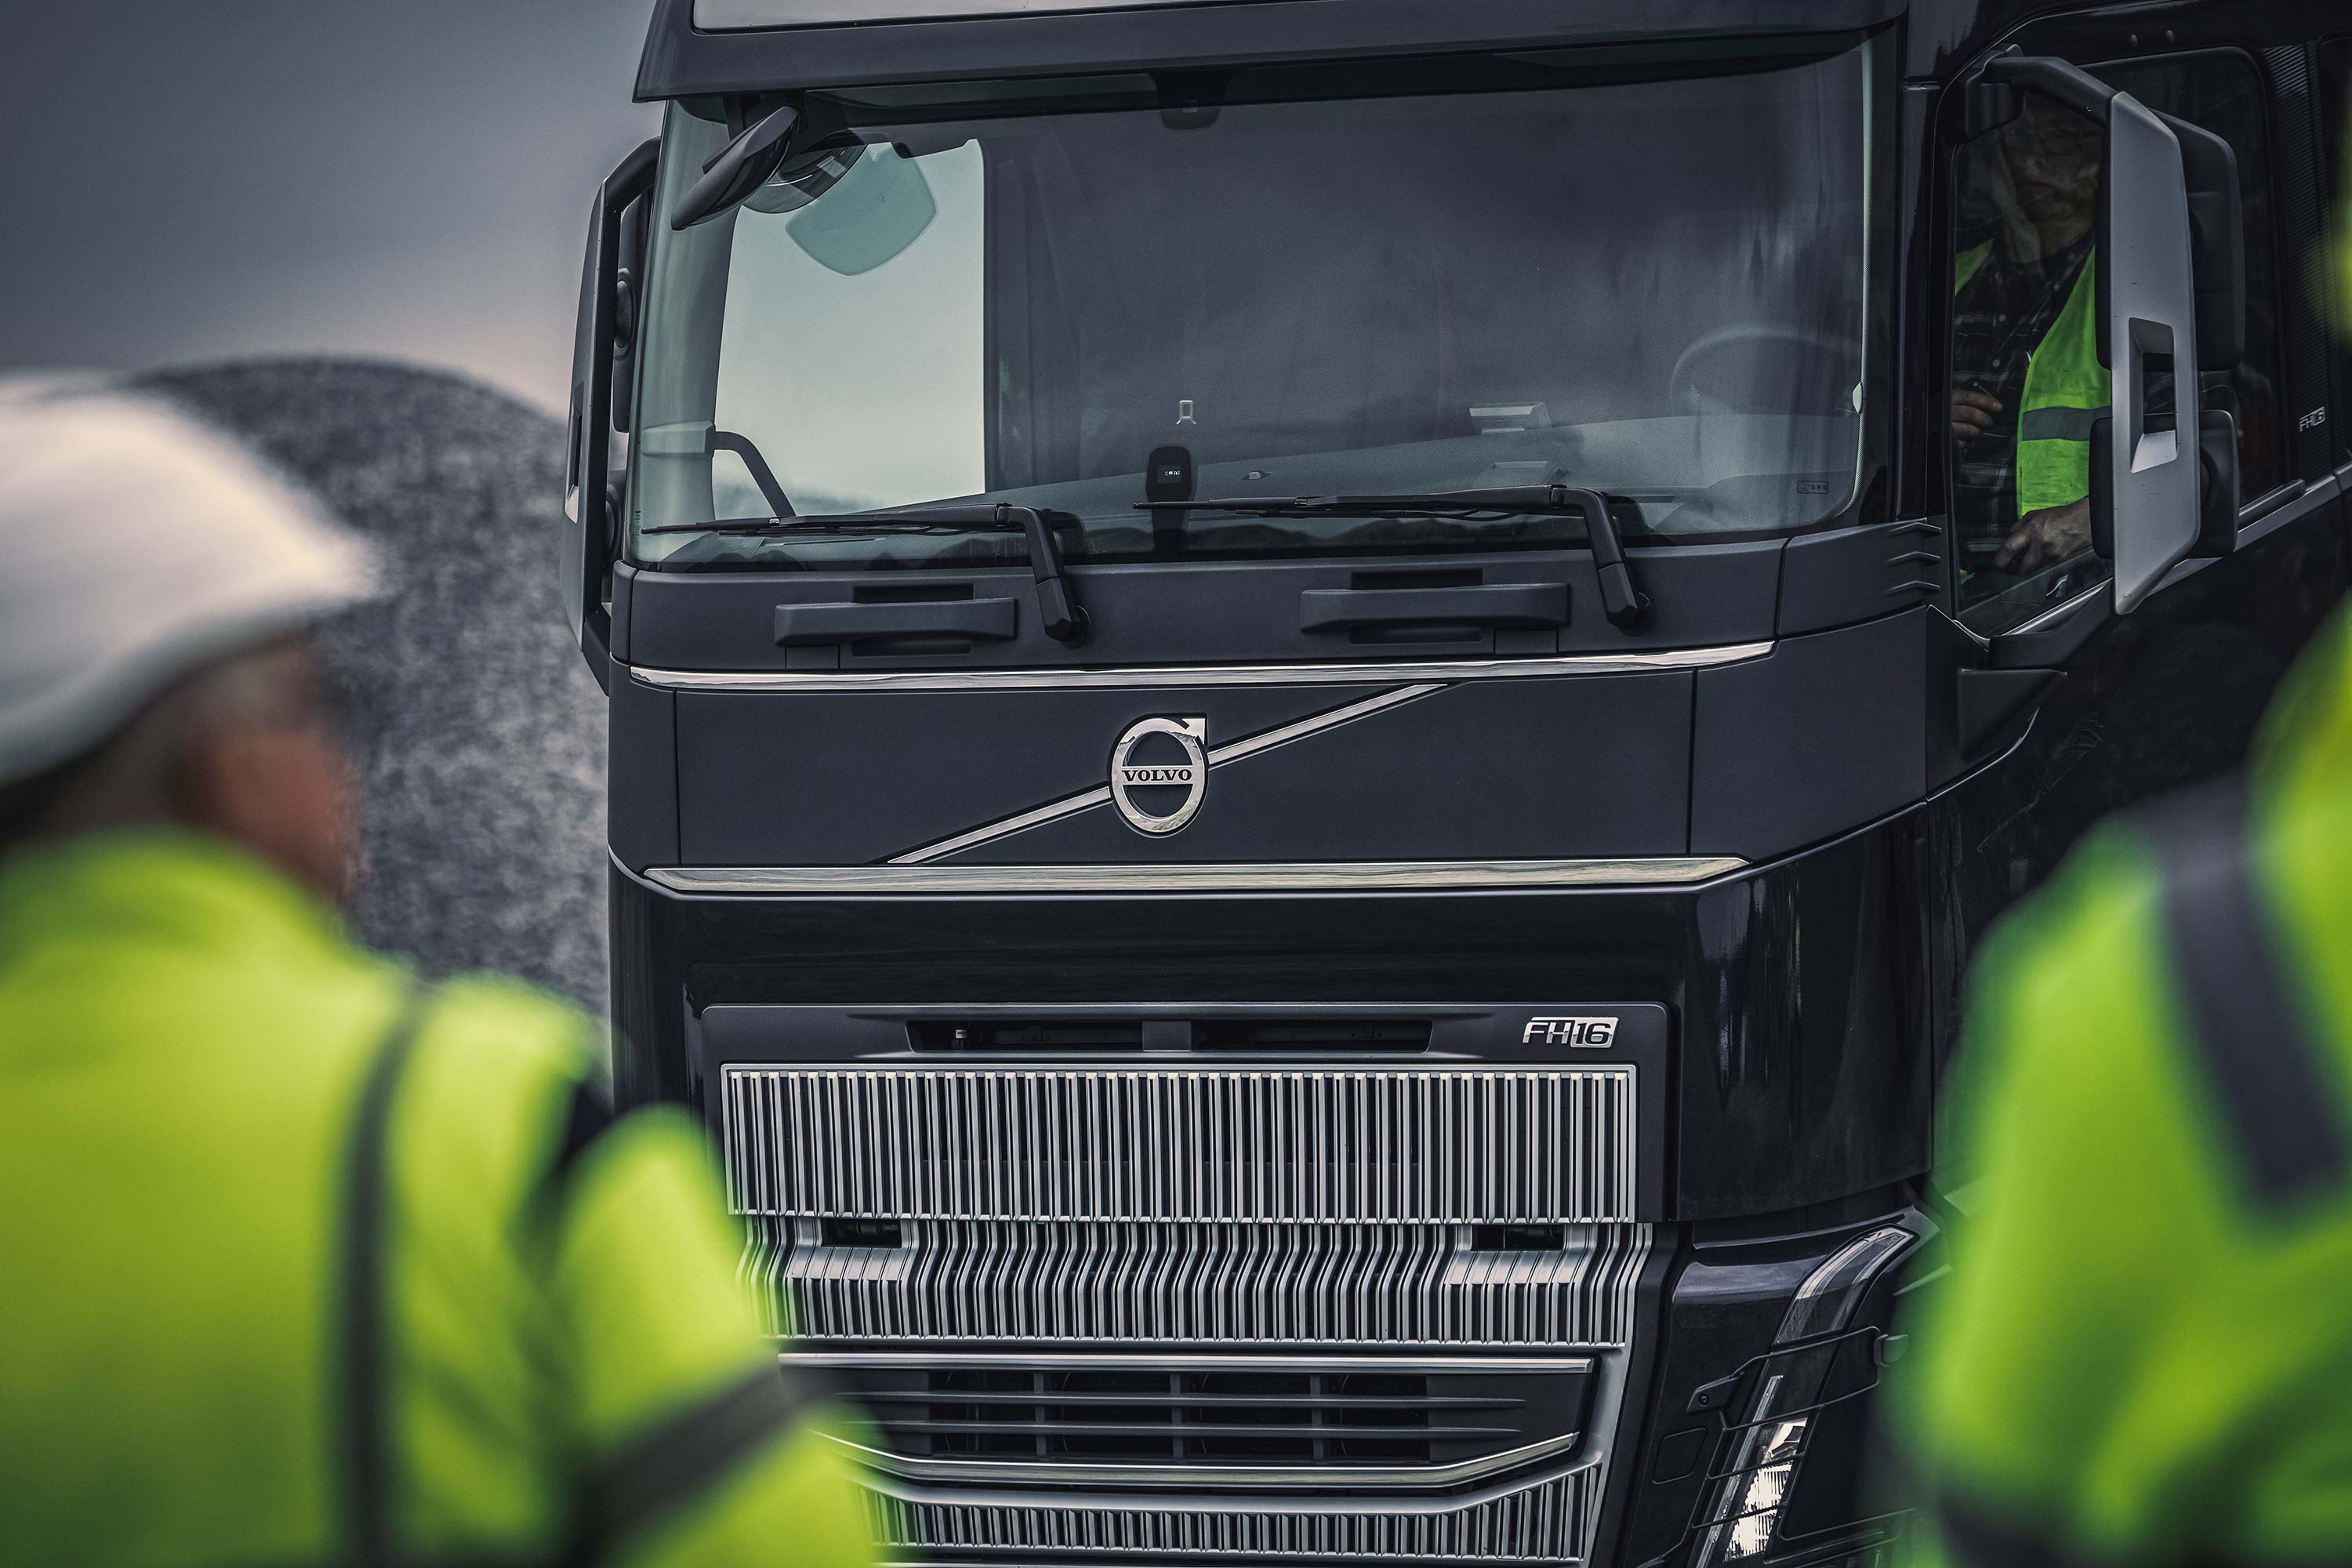 The waterfall grill makes the Volvo FH16 stand out from the crowd.